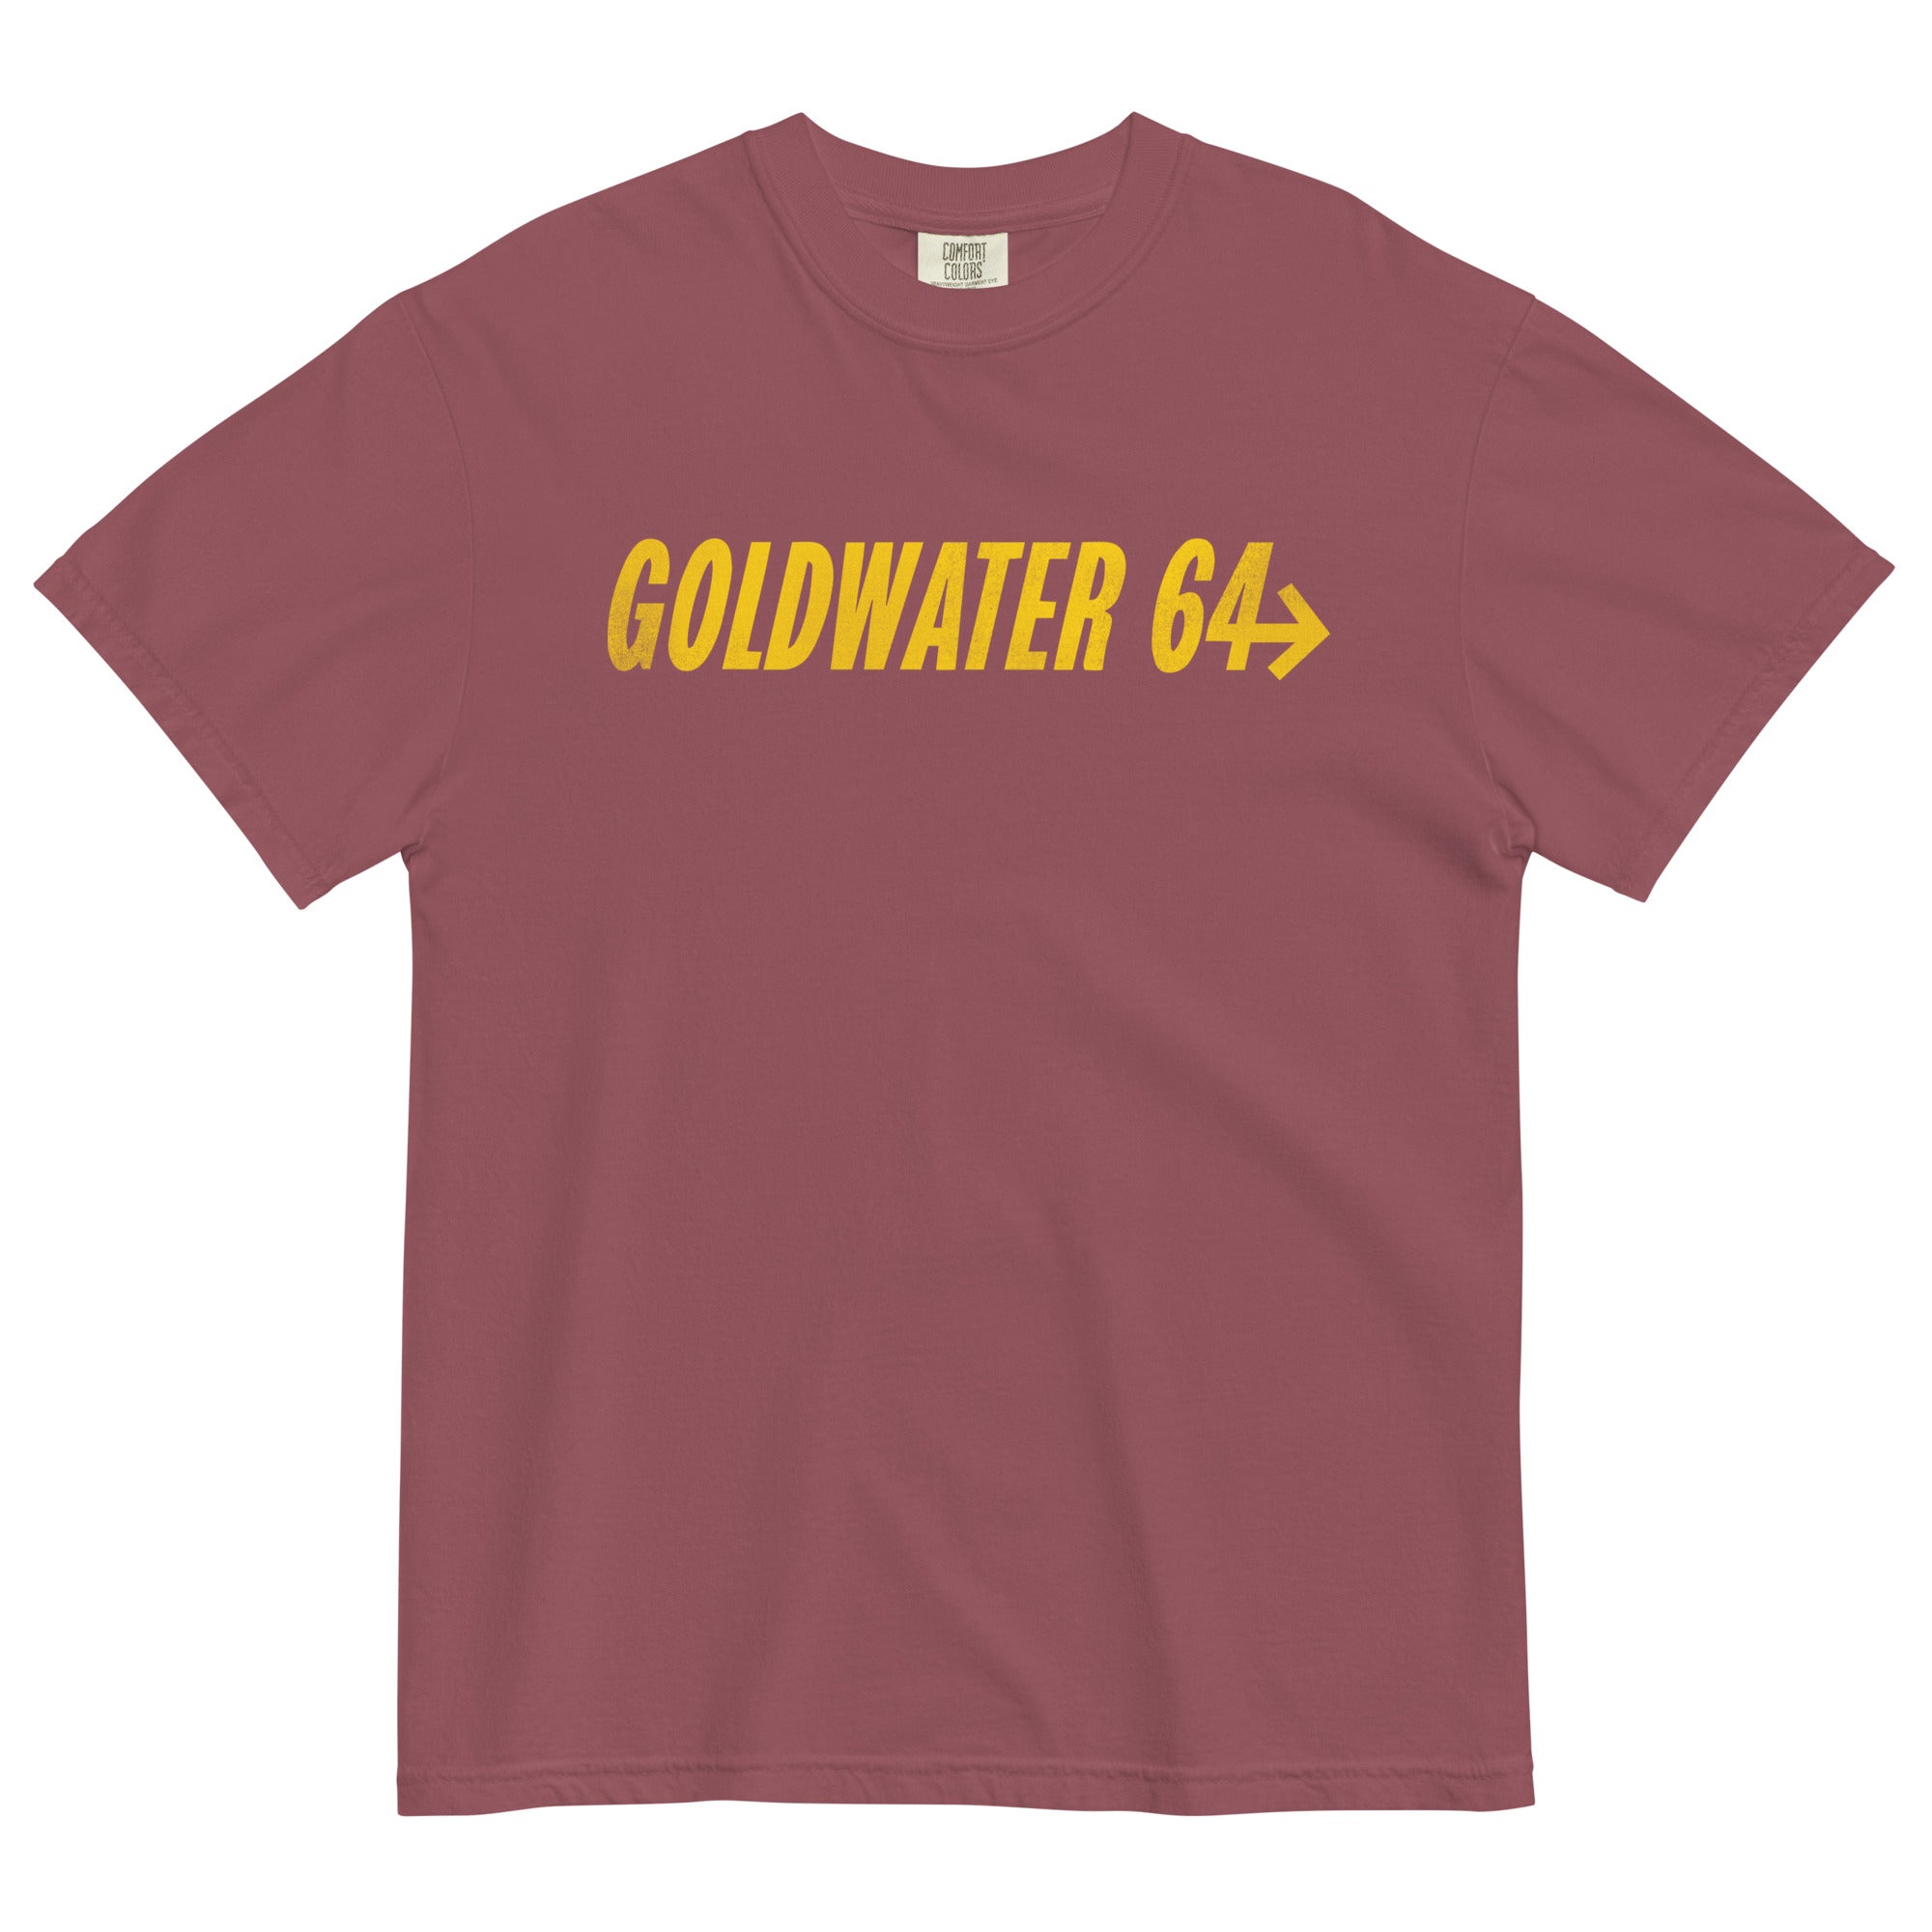 Goldwater 1964 Men’s Garment-dyed Heavyweight Reproduction Campaign T-shirt